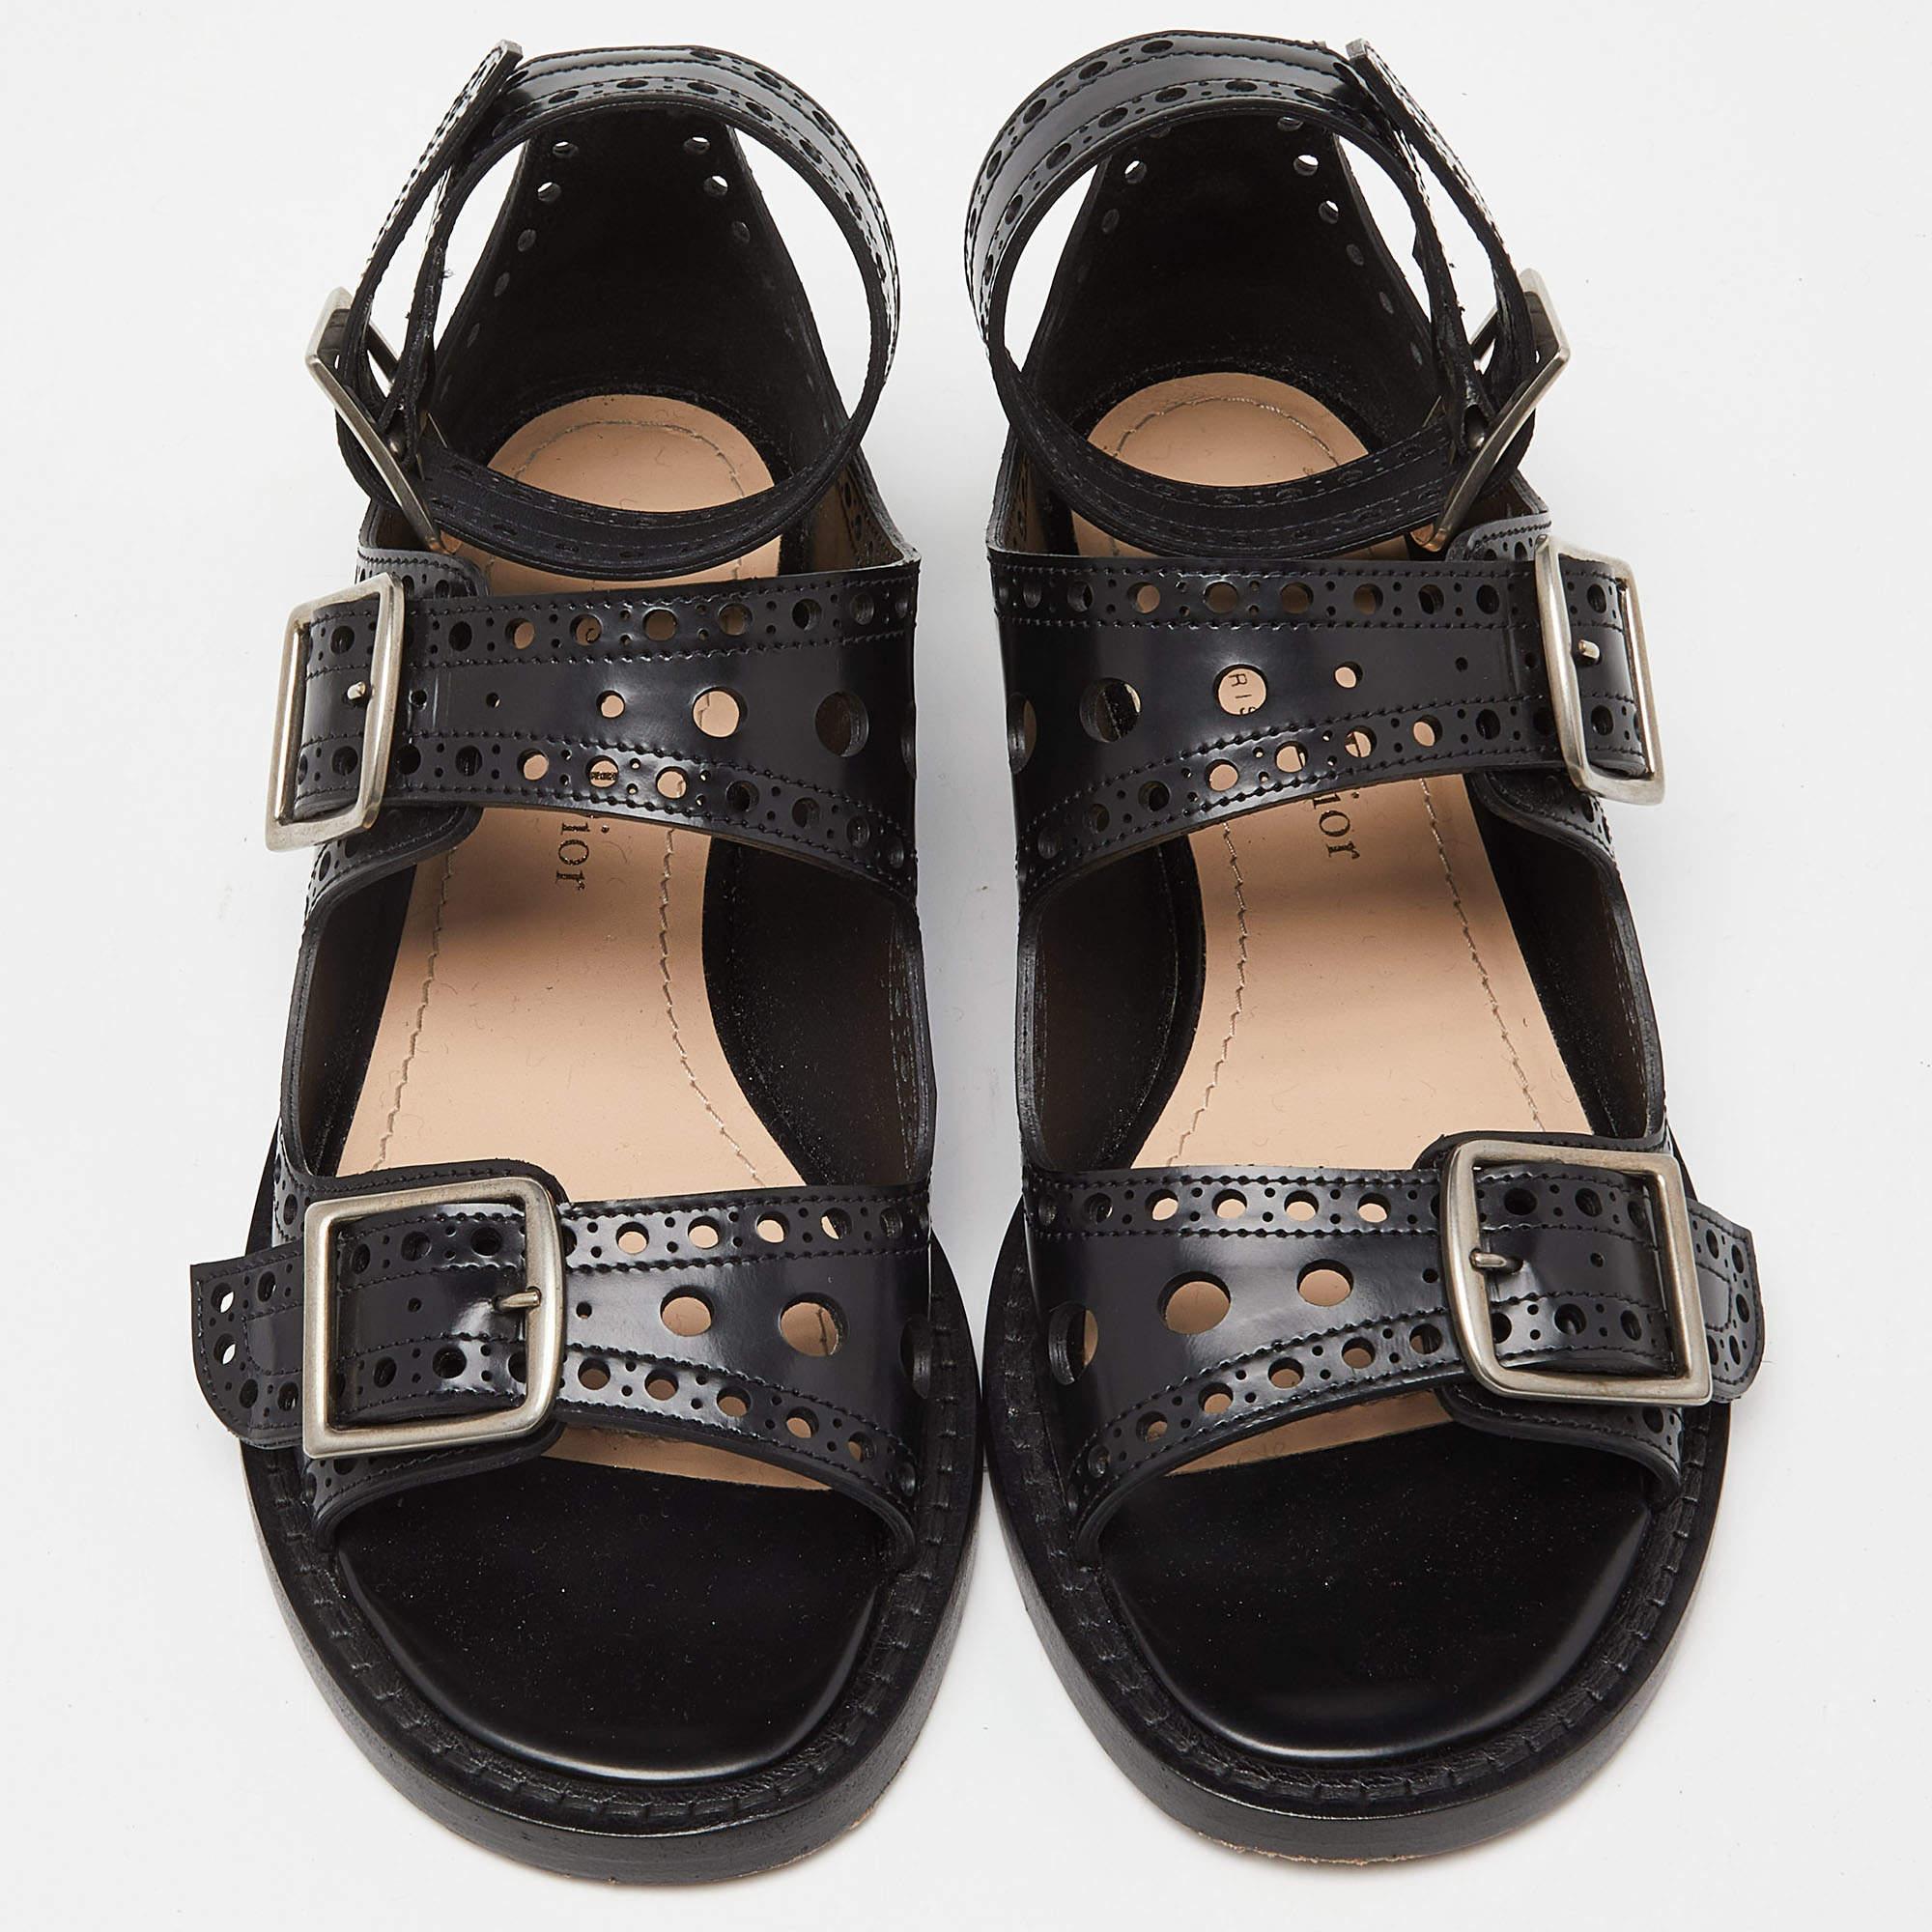 Frame your feet with these Dior flat sandals. Sewn using leather, the flats have three buckles, perforated lines, and open toes. They'll be perfect with short, midi as well as maxi hemlines.

